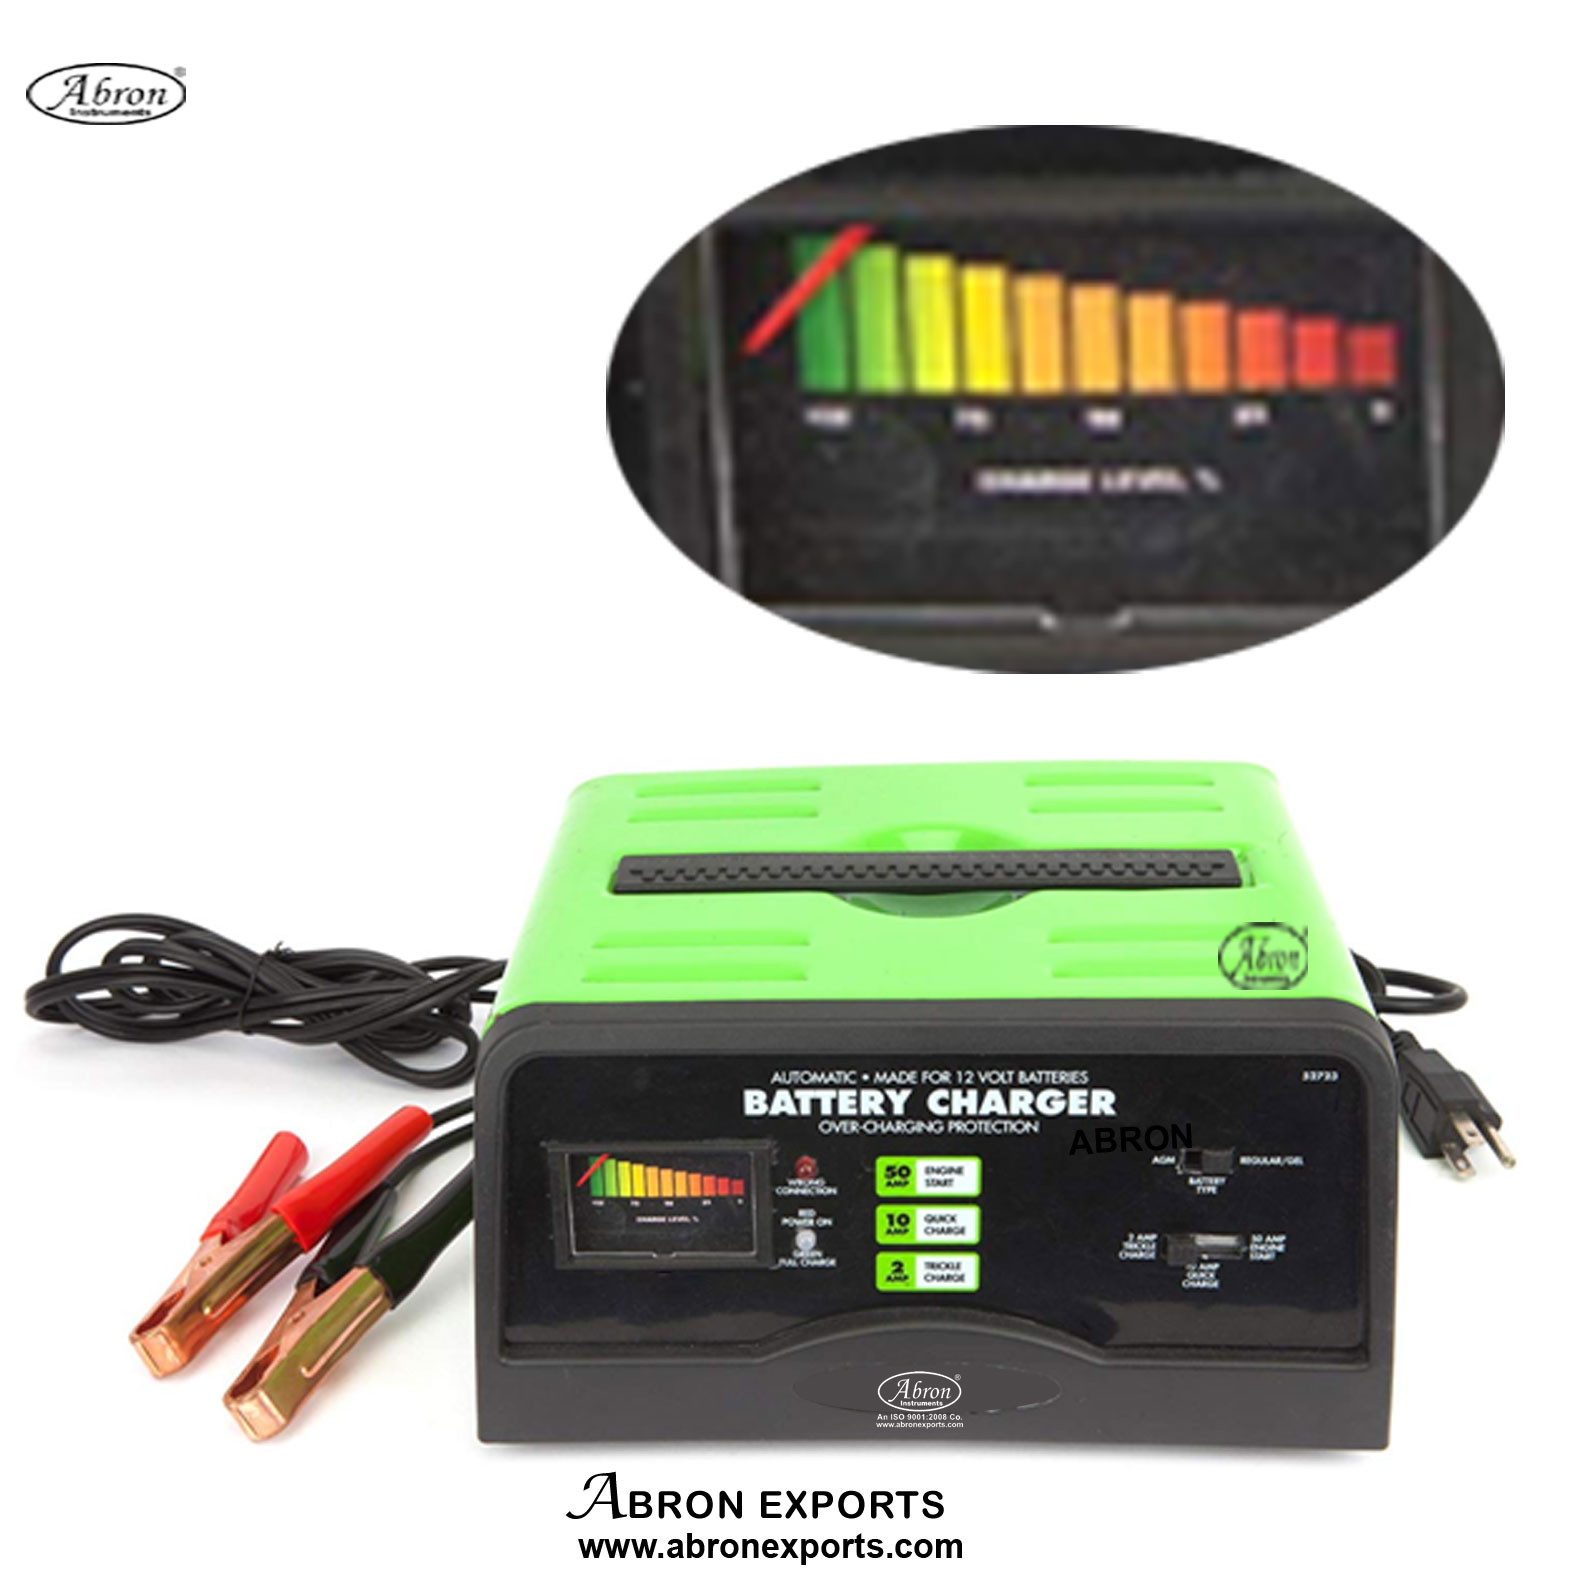 Battery Charger Automatic 10or 50 Amp Input 220v AC Output 0-12v With Heavy Wire Crocodial Clips Abron AE-1207A50